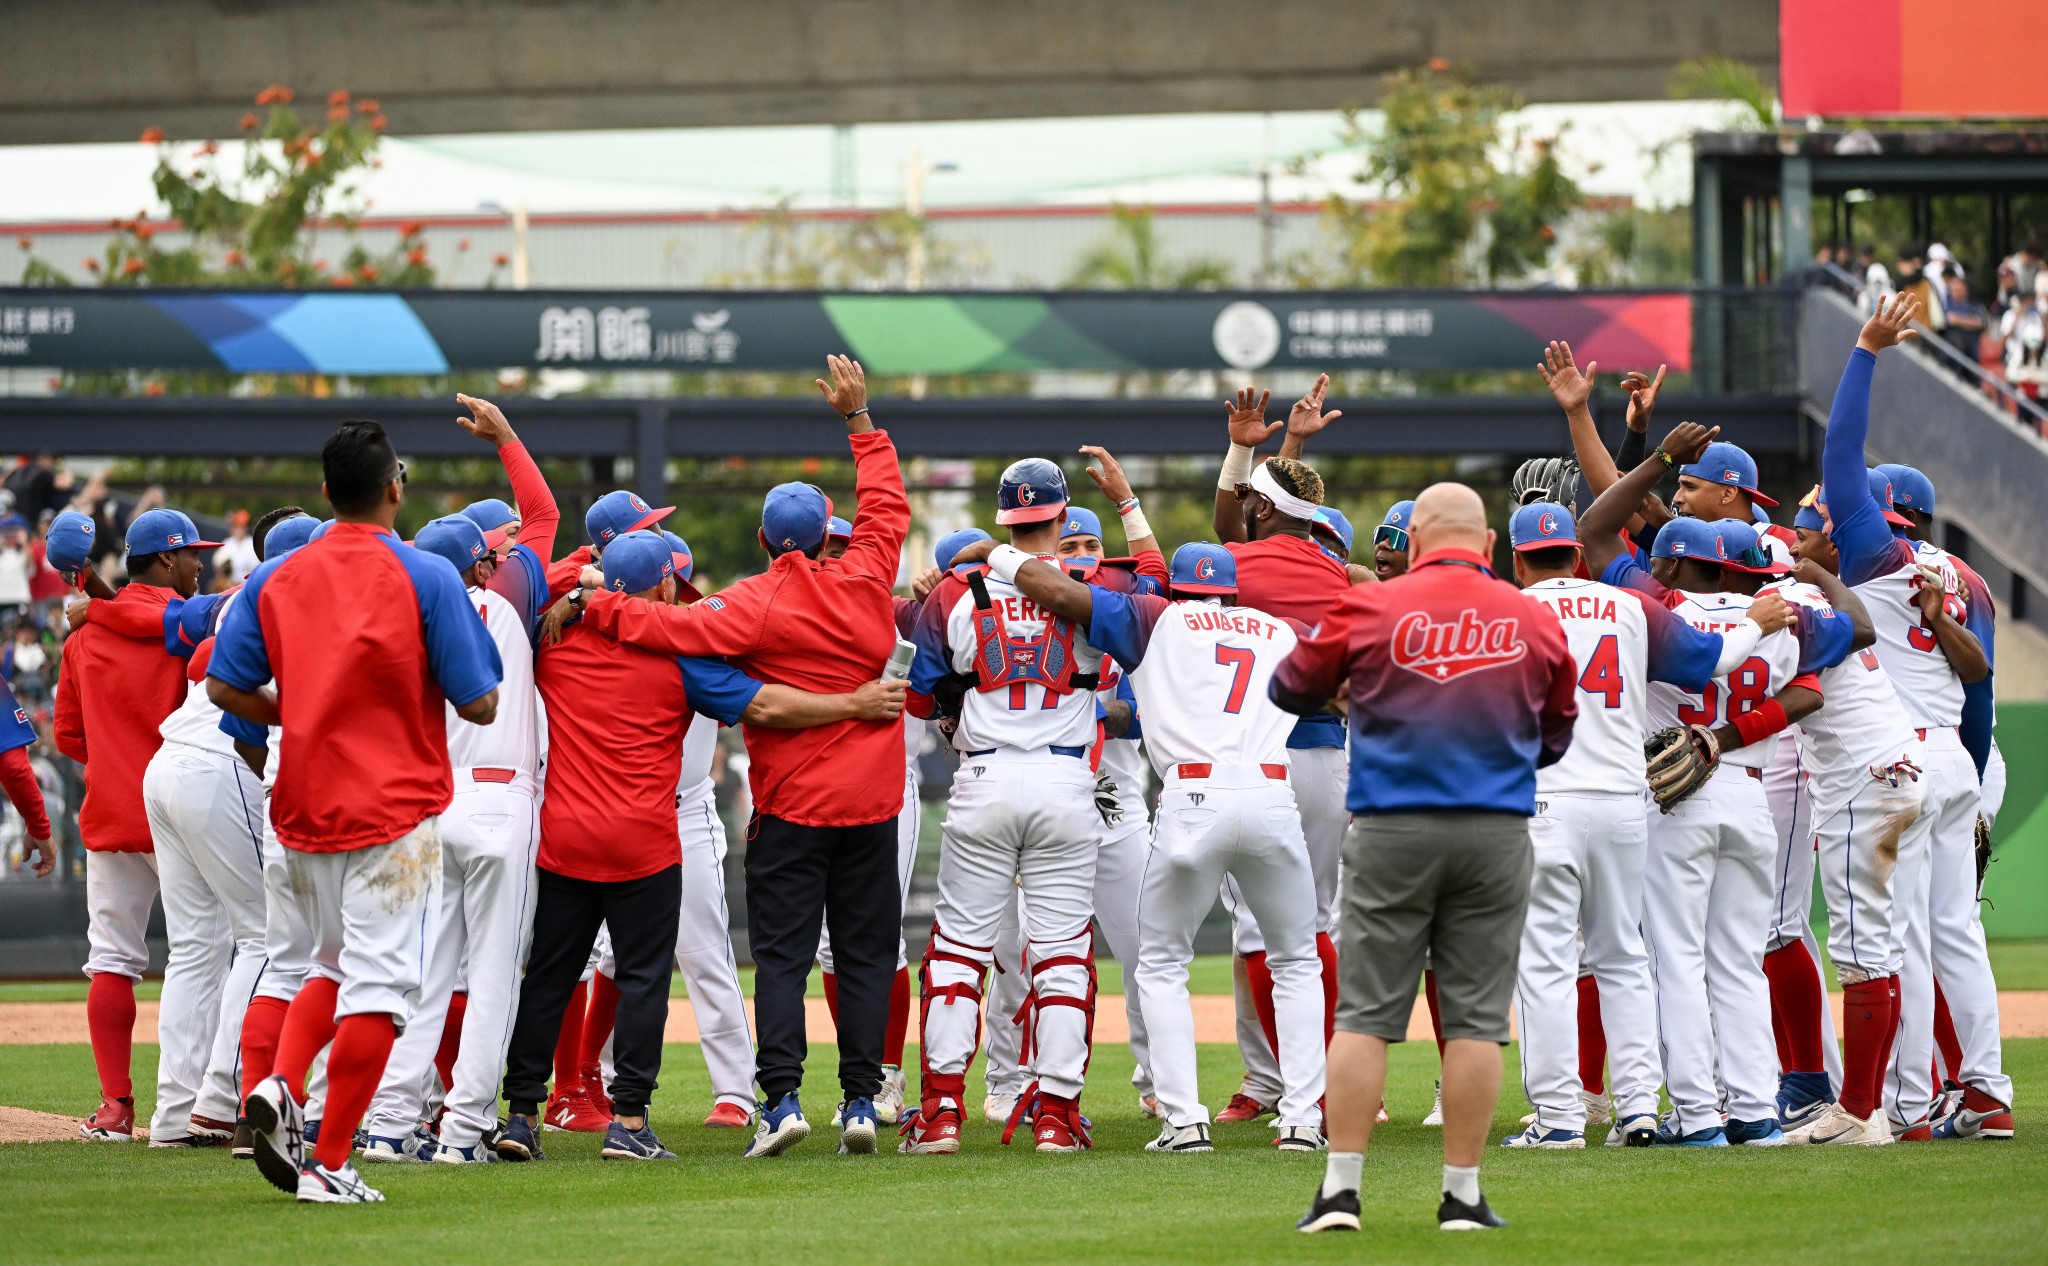 Cuba thrashed hosts Chinese Taipei 7-1 to top Pool A on a tie-break at the World Baseball Classic ©Getty Images